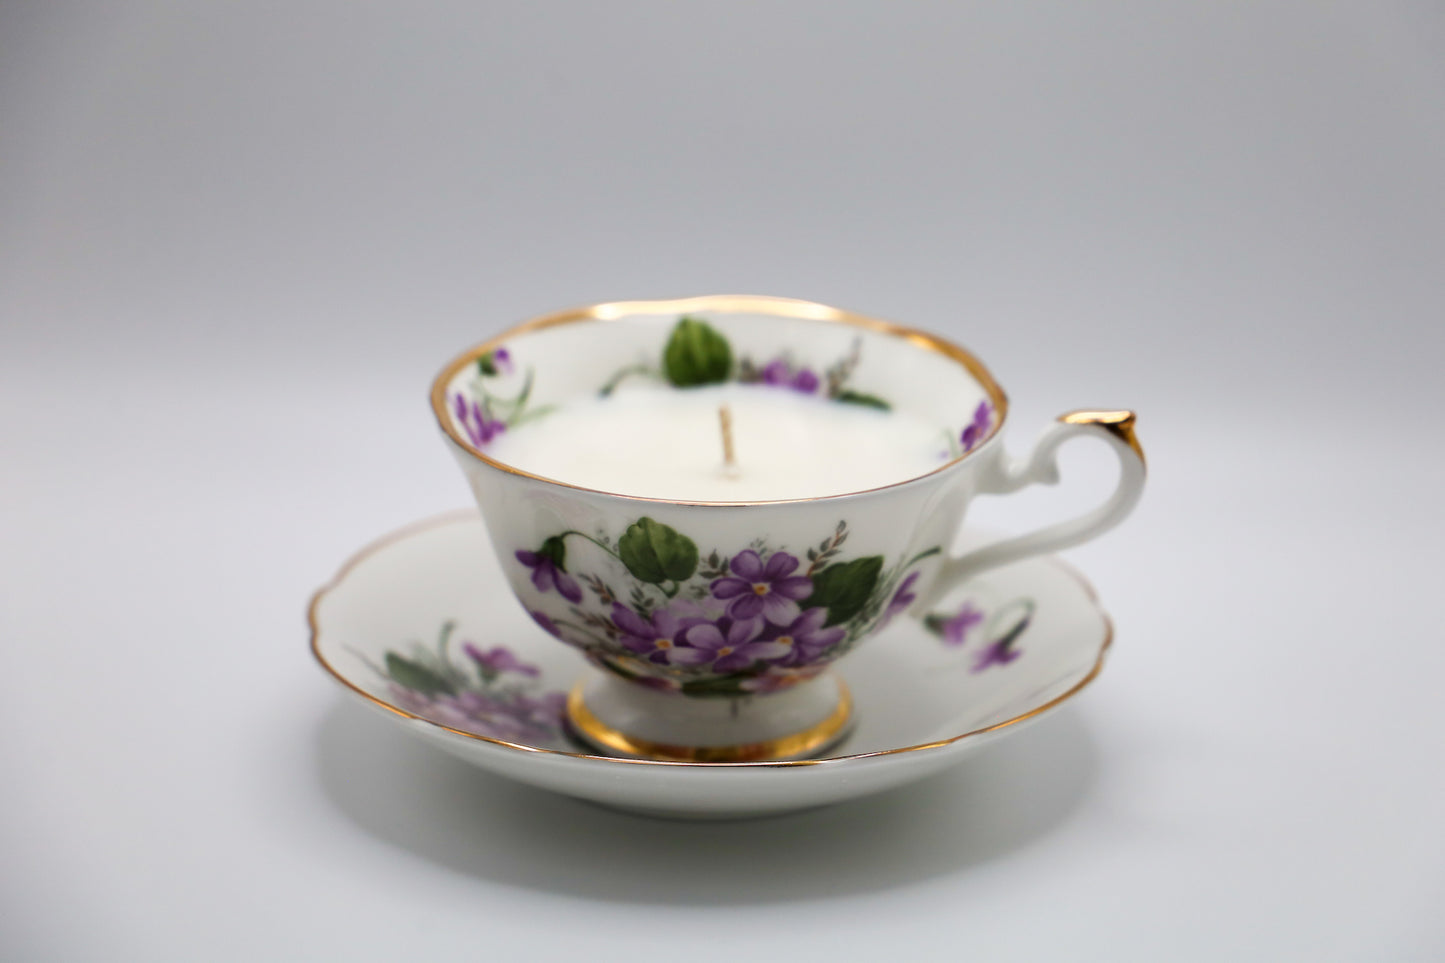 Vivid Violet pattern tea cup and saucer with Lush Succulent scented soy candle.